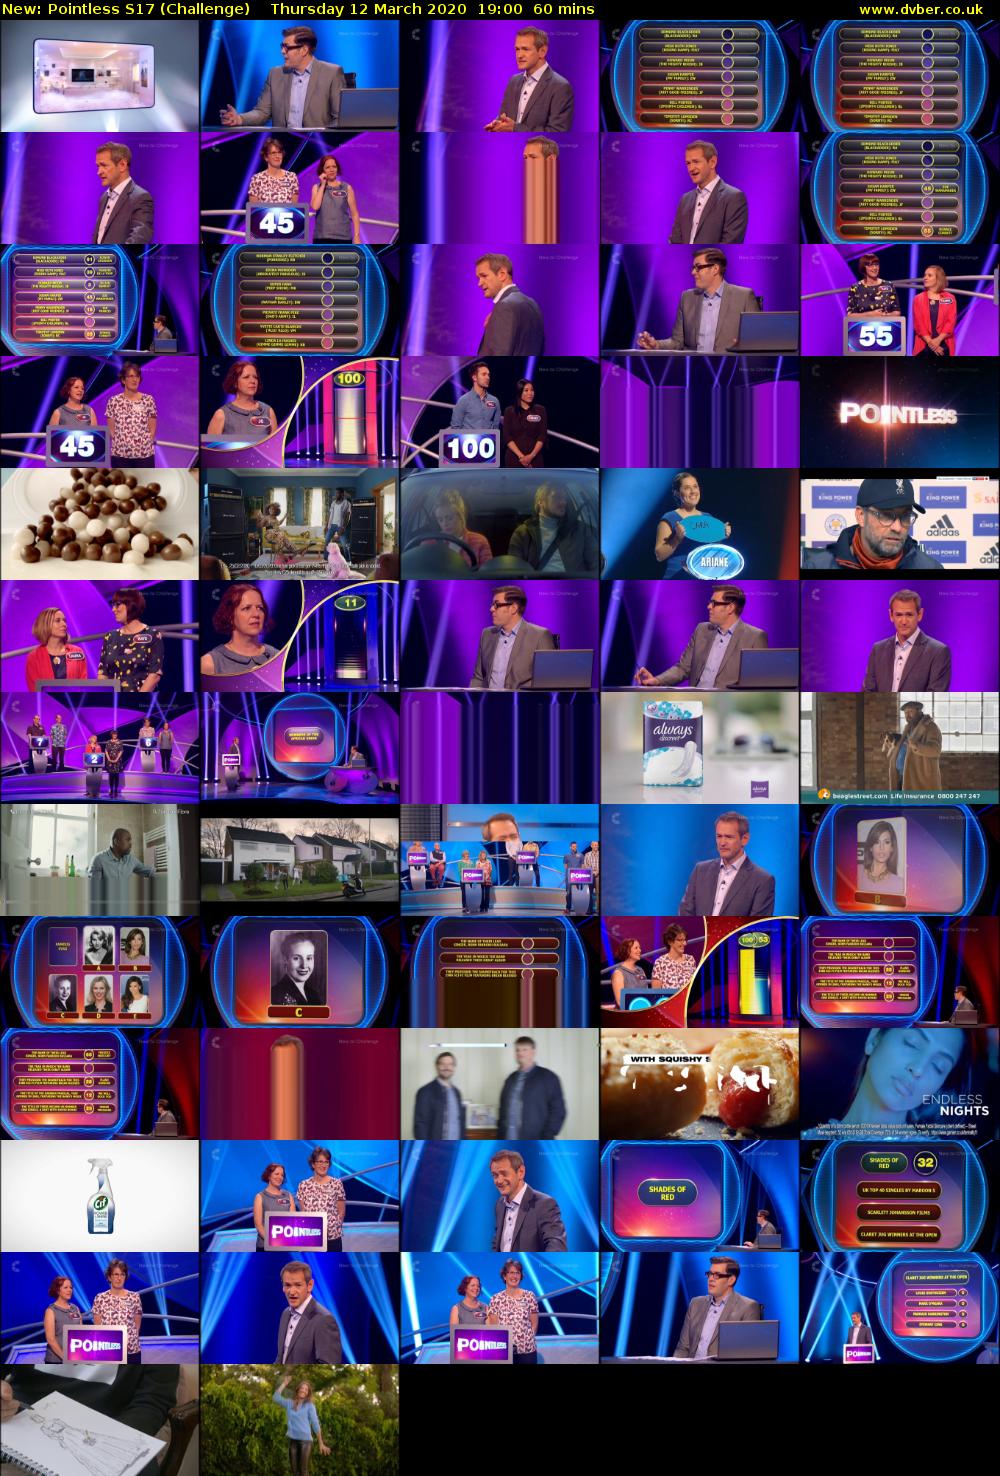 Pointless S17 (Challenge) Thursday 12 March 2020 19:00 - 20:00